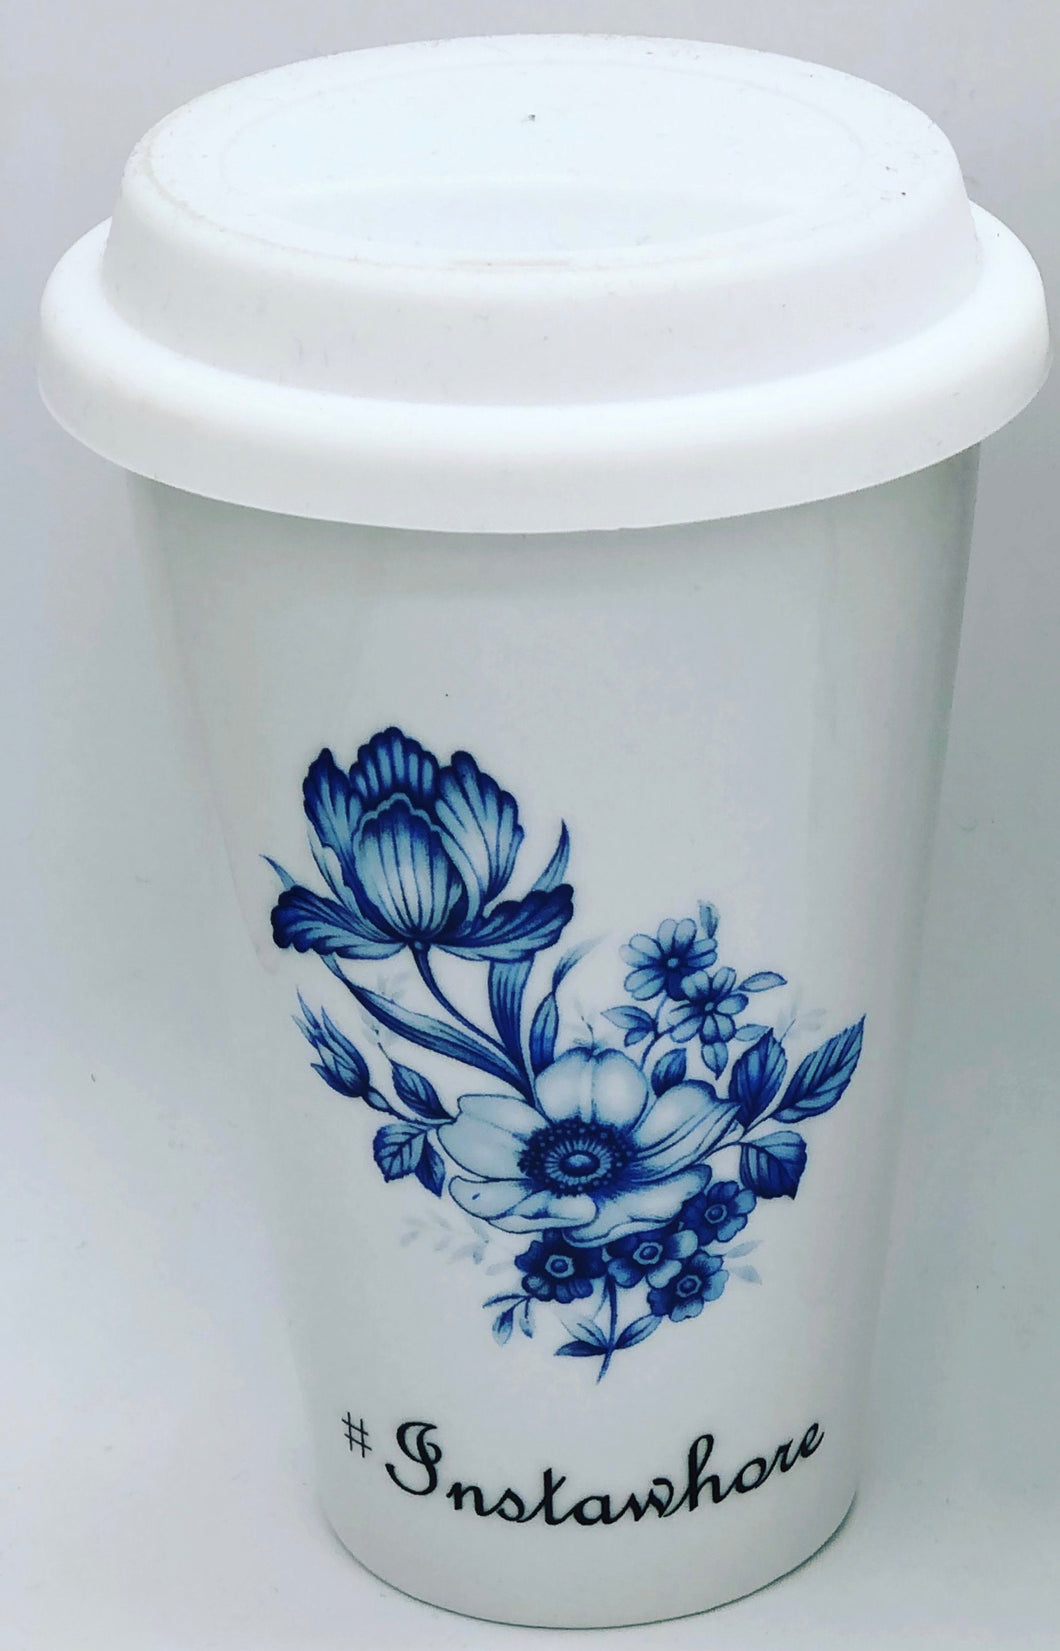 A personalised travel mug with your choice of words and florals